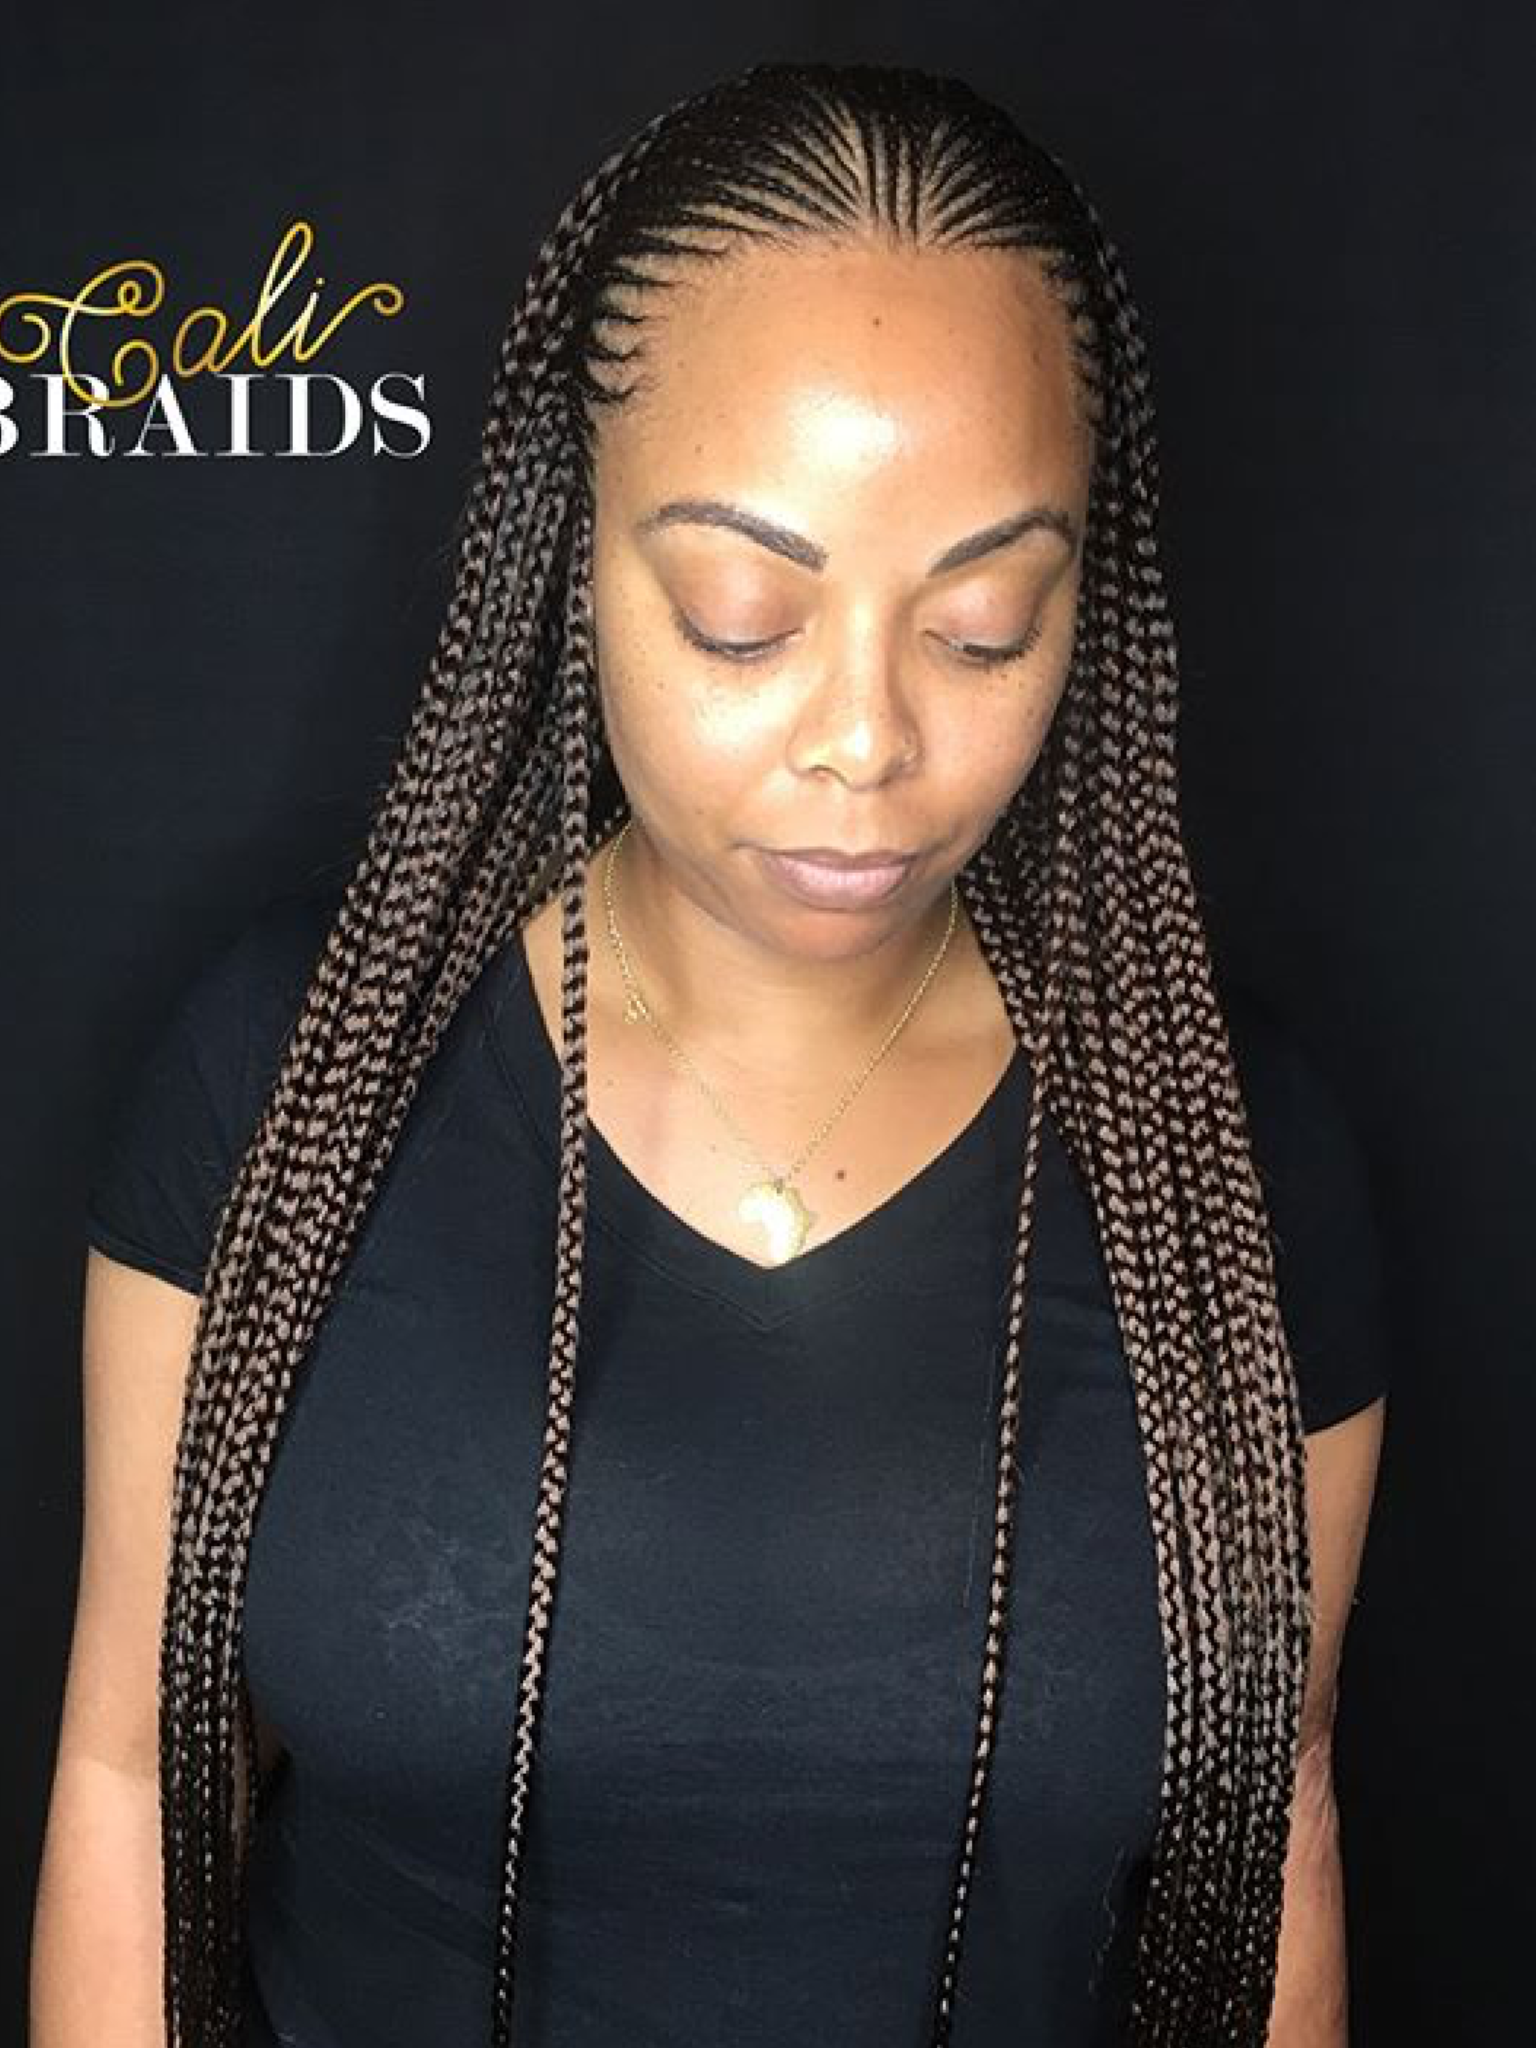 29 gallery Ghana Braids Styles With Pictures 2020 for Girls